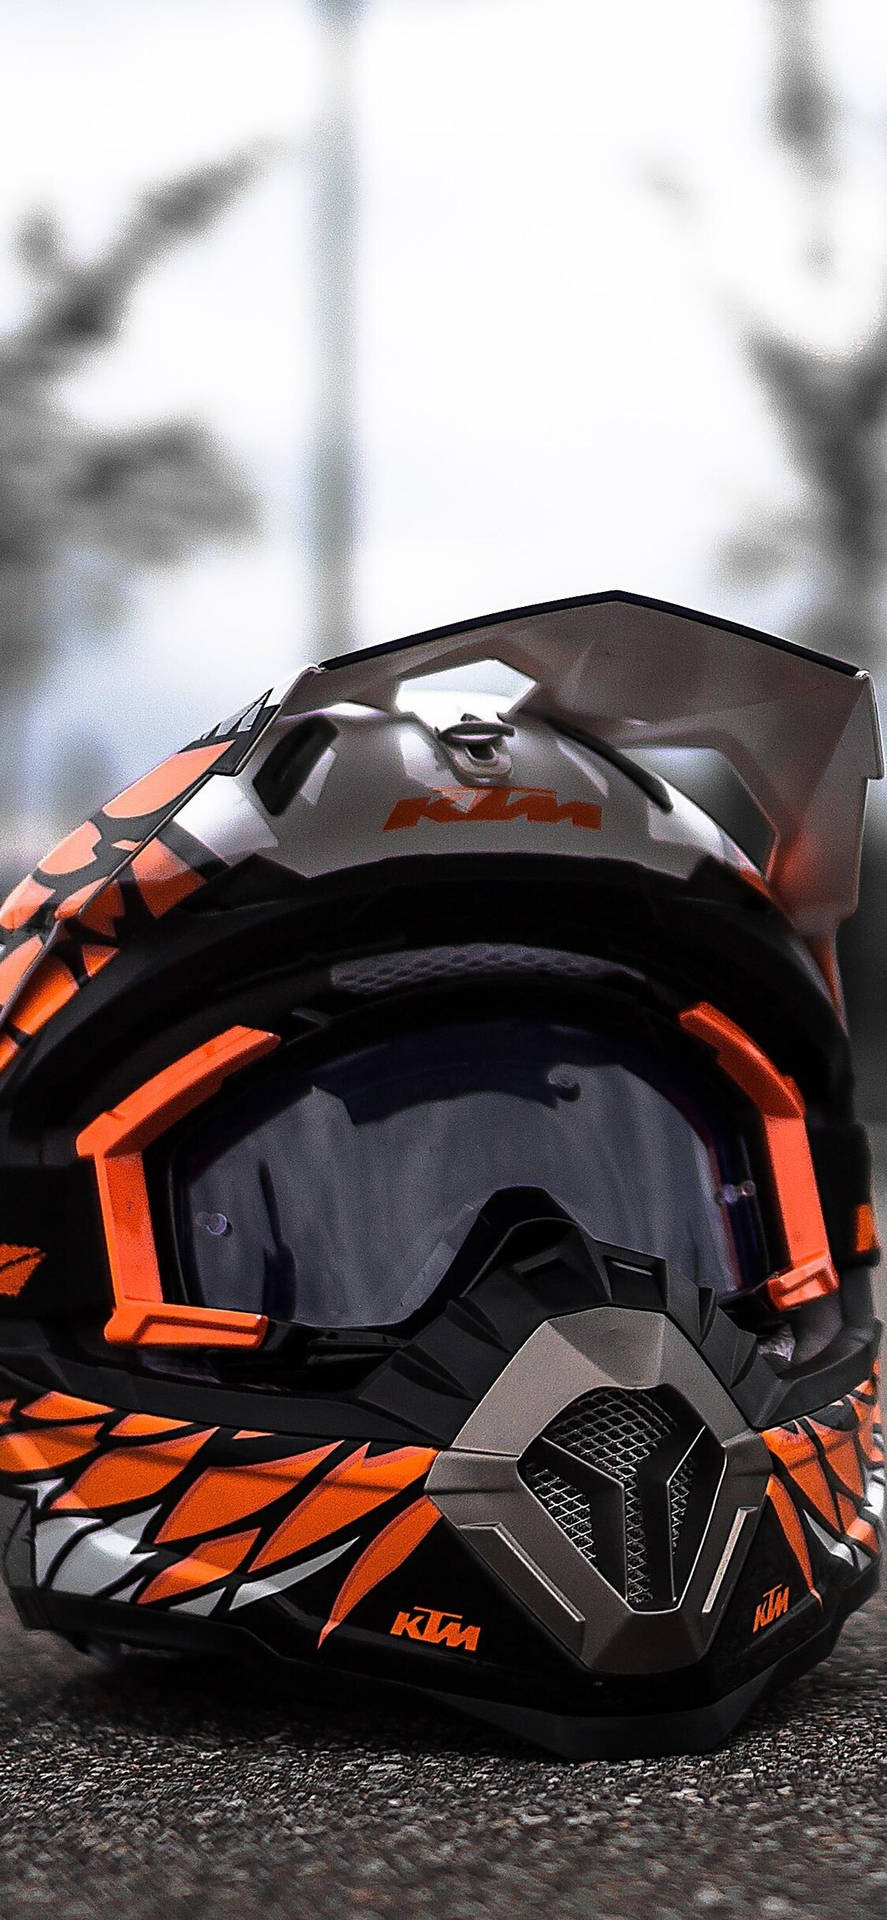 Stay Ahead of the Curve with KTM iPhone Wallpaper Wallpaper